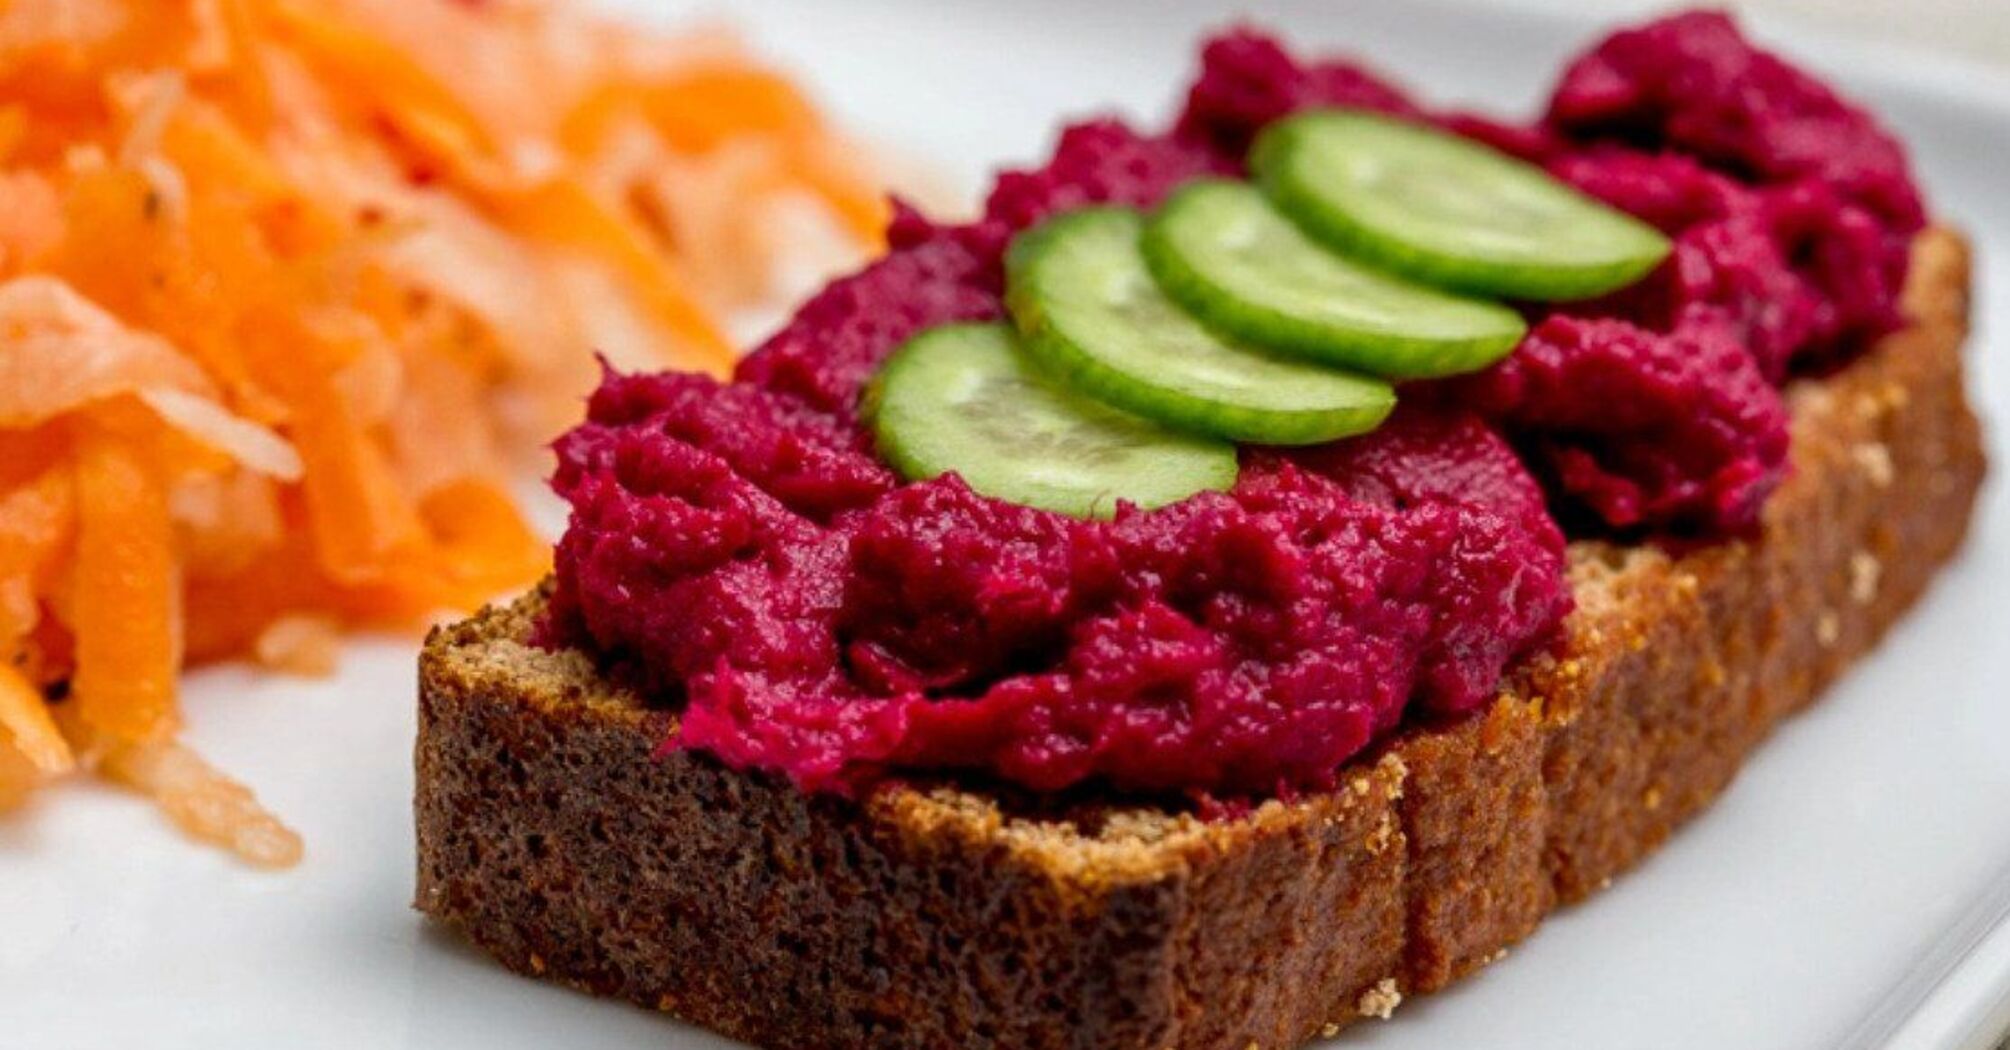 Recipe for a beet appetizer